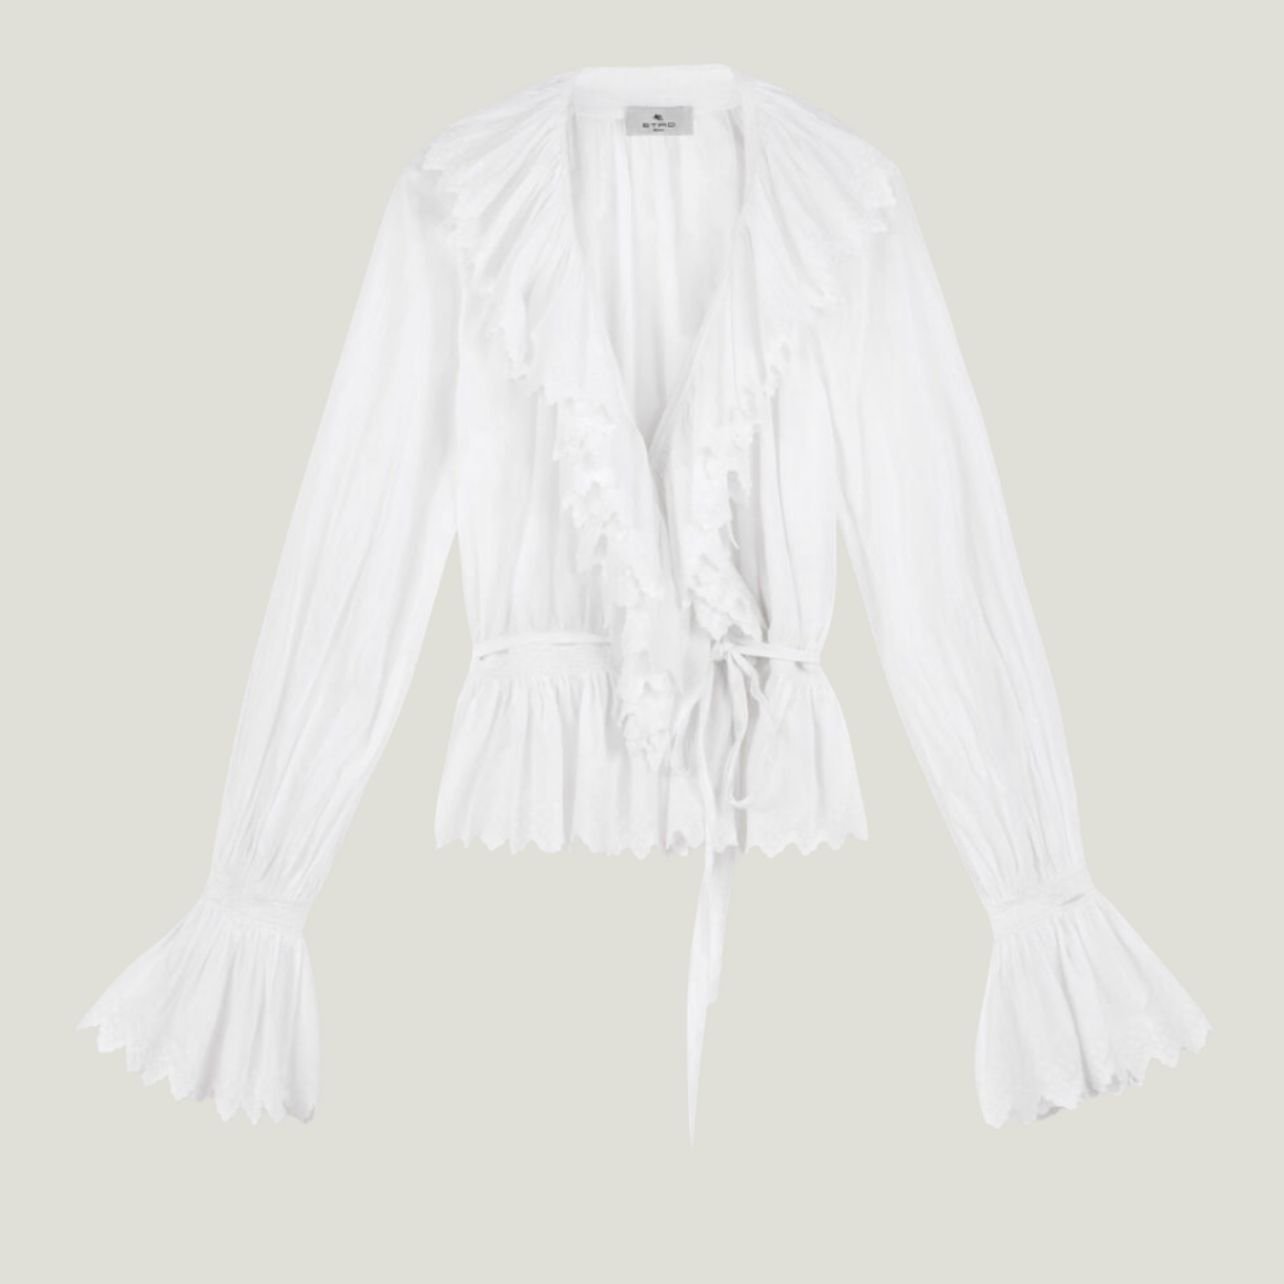 Etro long sleeve white blouse with lace ruffle detailing and a tie closure